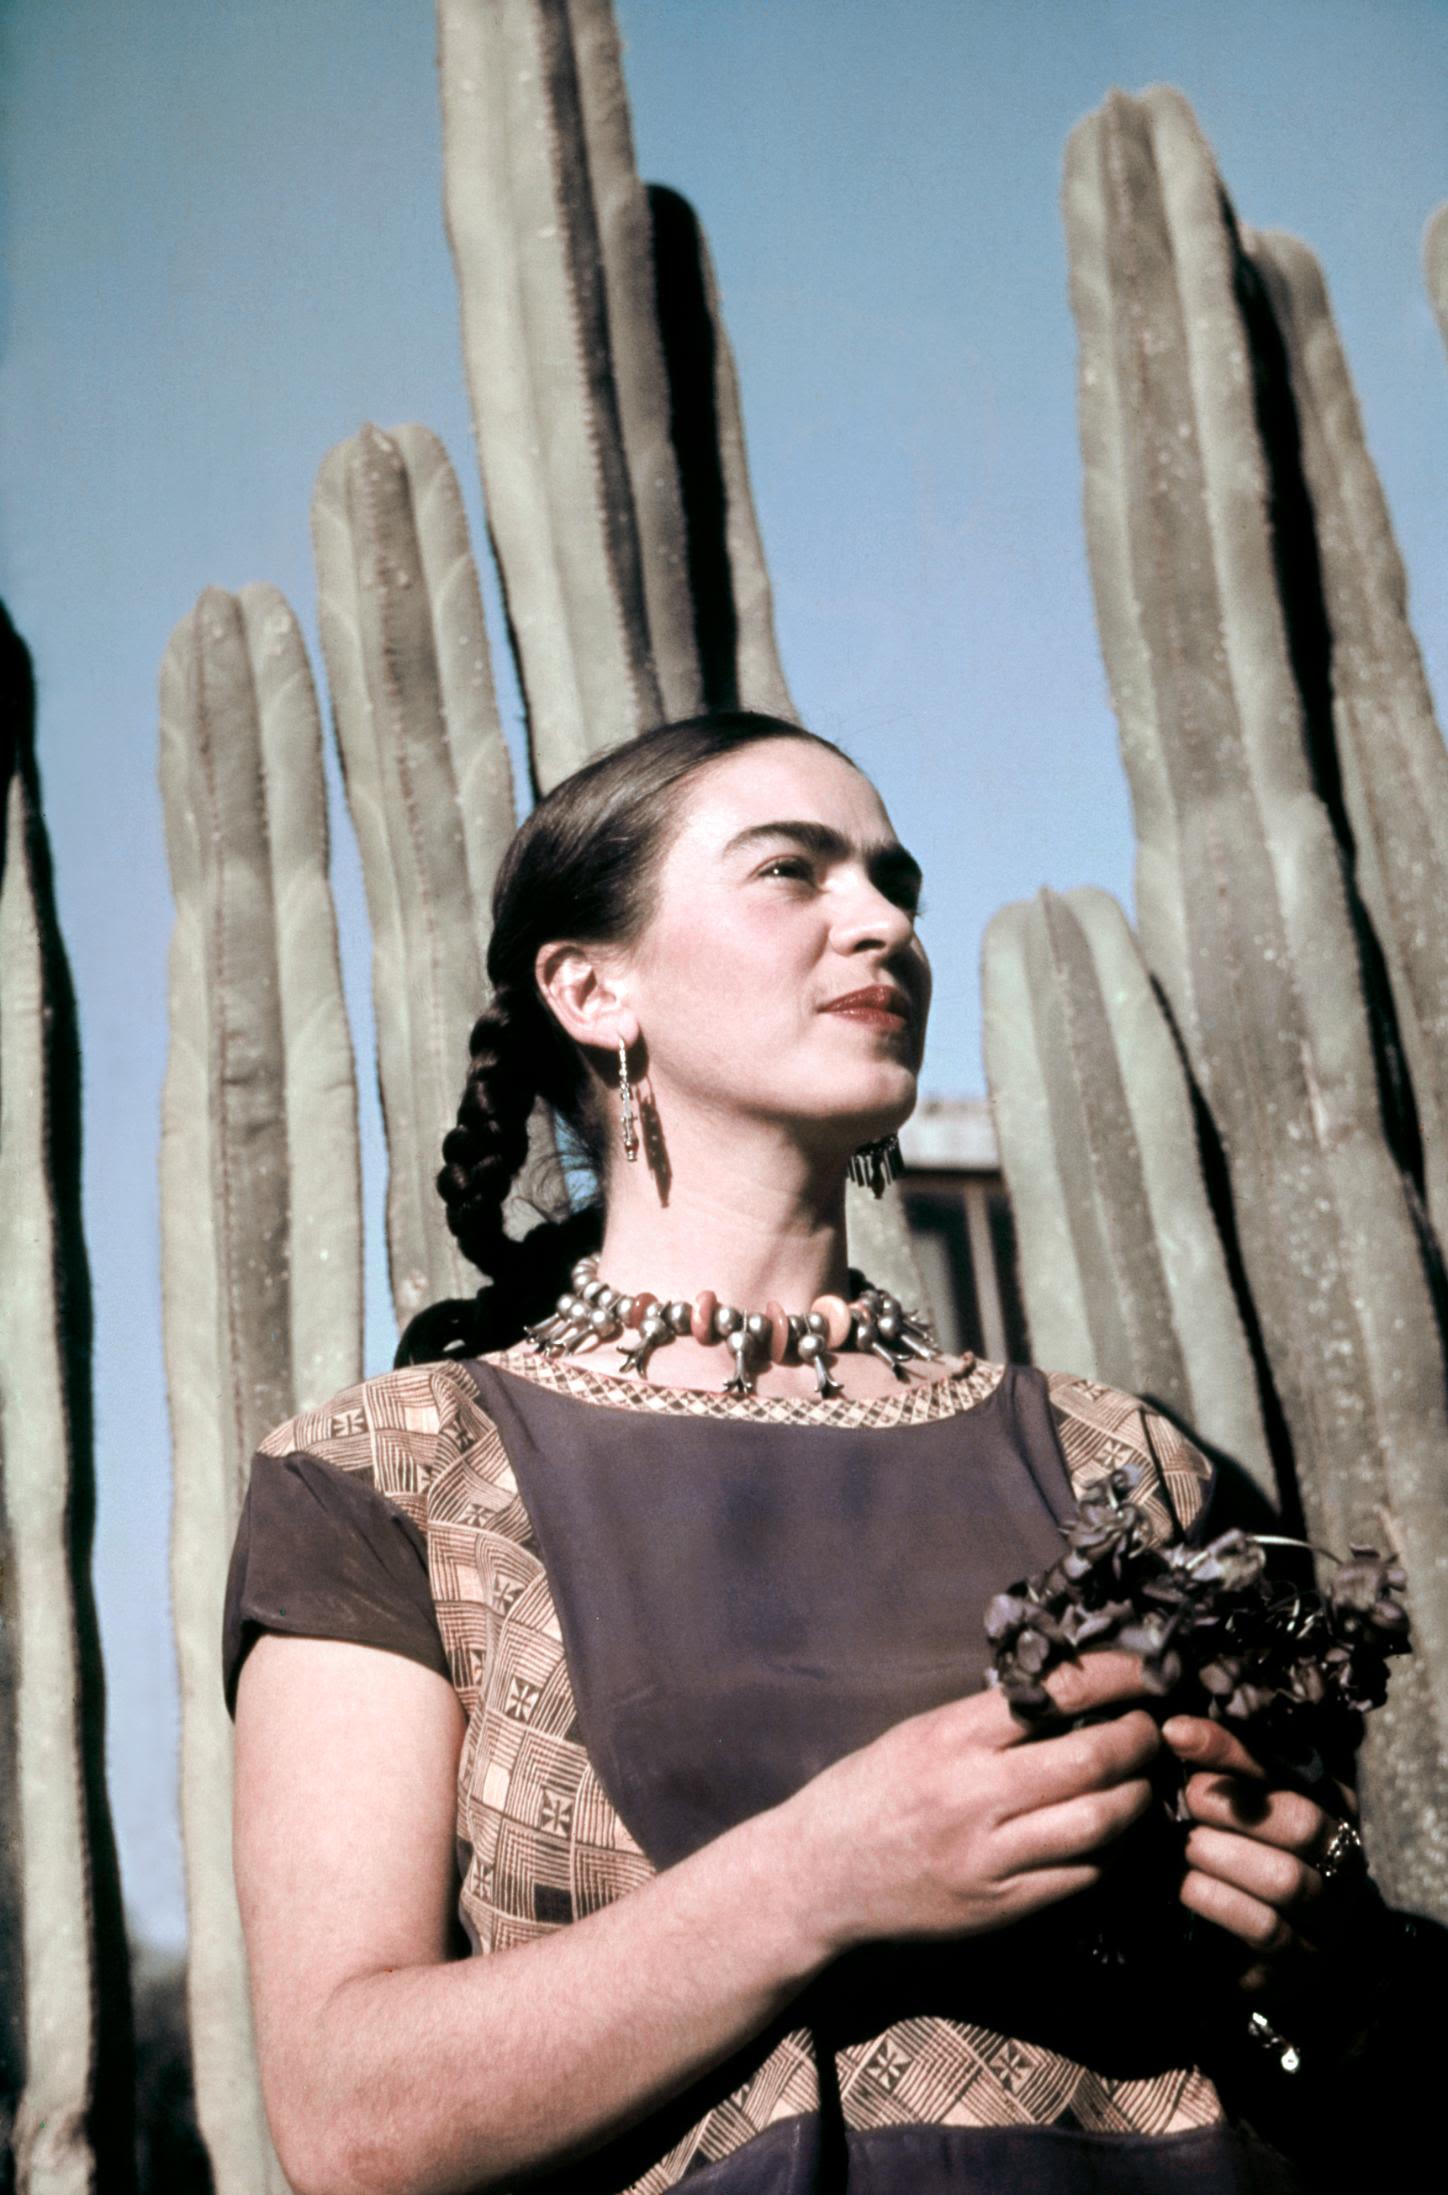 The 5 Faces of Frida Kahlo